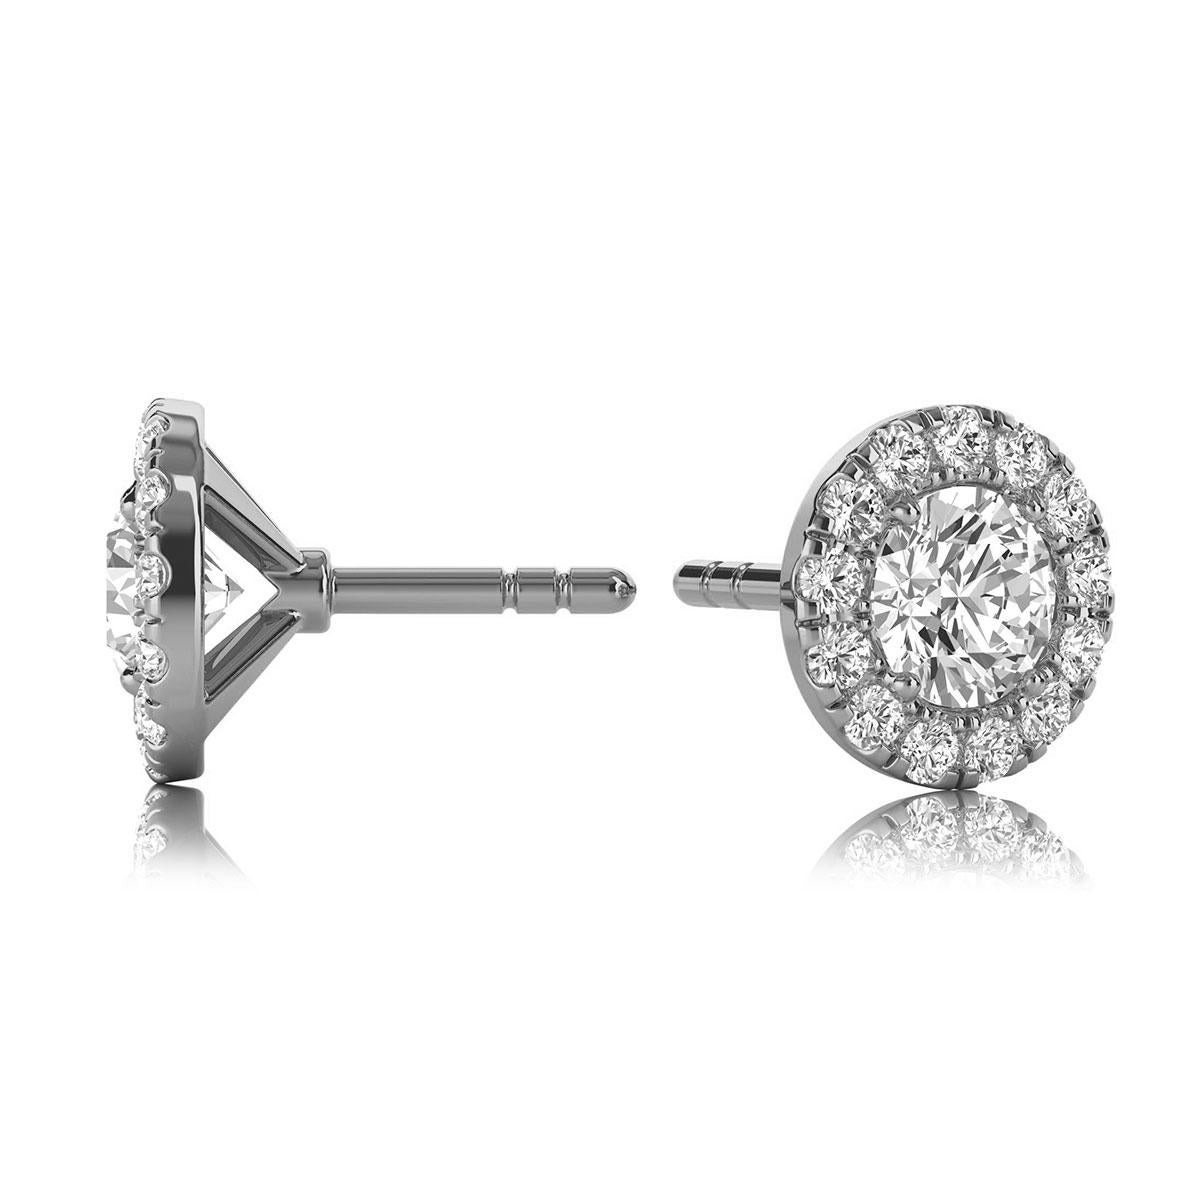 These delicate earrings feature two round shaped diamonds that are approximately 0.50-carat total weight (4mm) encircled by a halo of perfectly matched 26 round brilliant diamonds in about 0.25-carat total weight. The earrings are measuring at 7mm